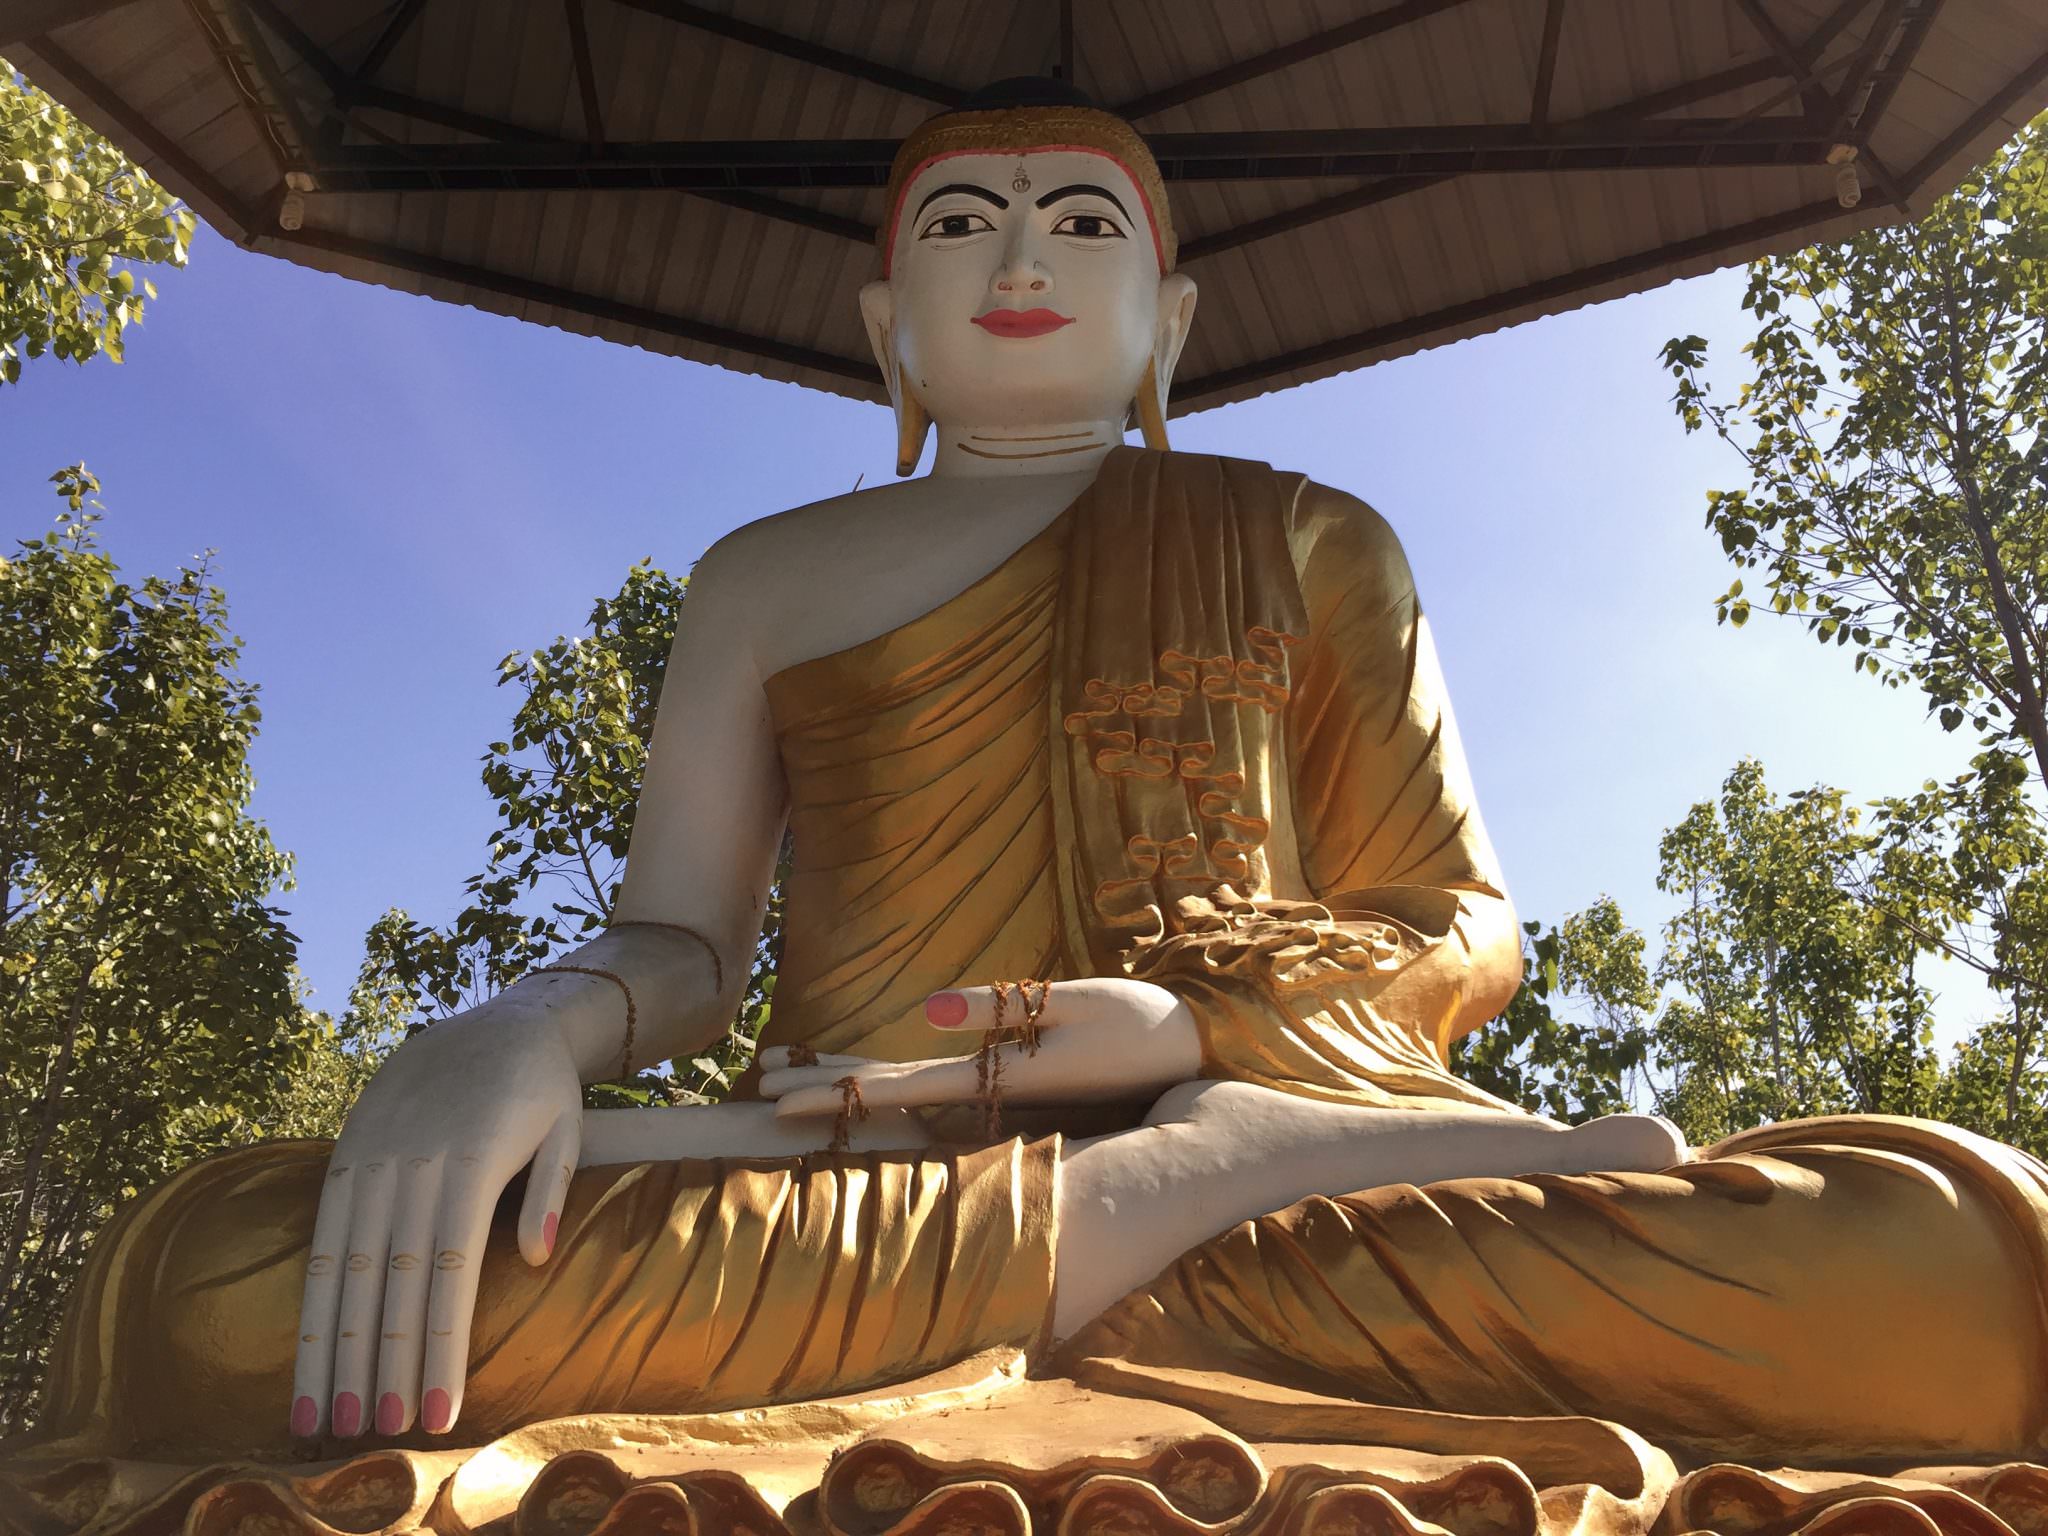 One central statue watches over the park. The mudra of this Buddha's hands symbolizes meditation (left) and not wavering from that practice by staying grounded under the bodhi tree until he achieves enlightenment (right). © 2015 Gail Jessen